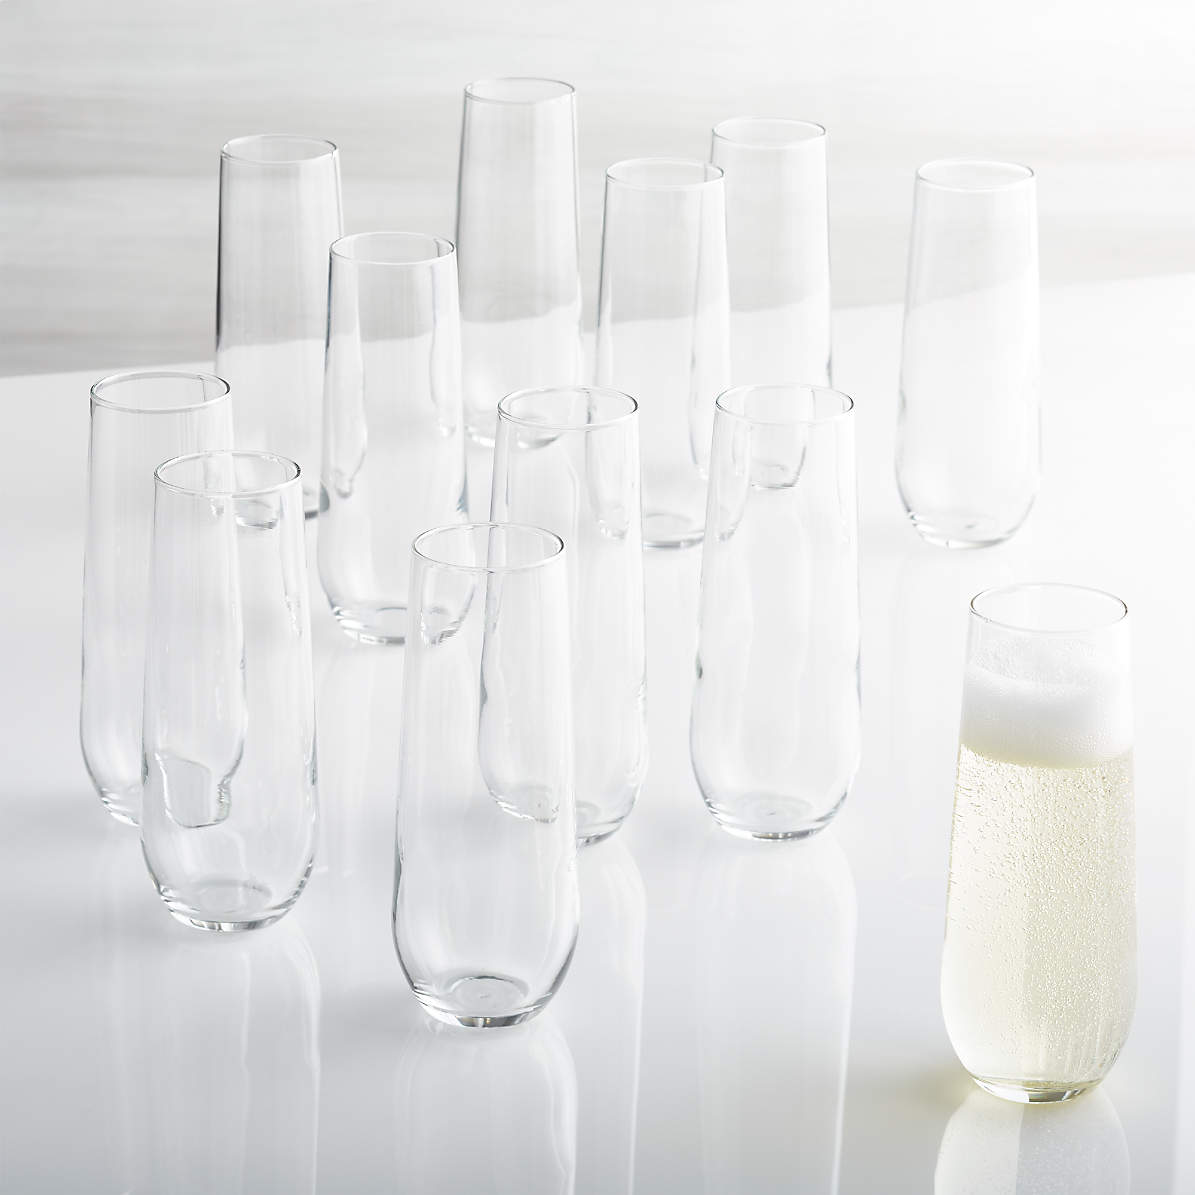 Luxh Stemless Champagne Flutes Glass - Set of 4, 9.4 oz - Pacific